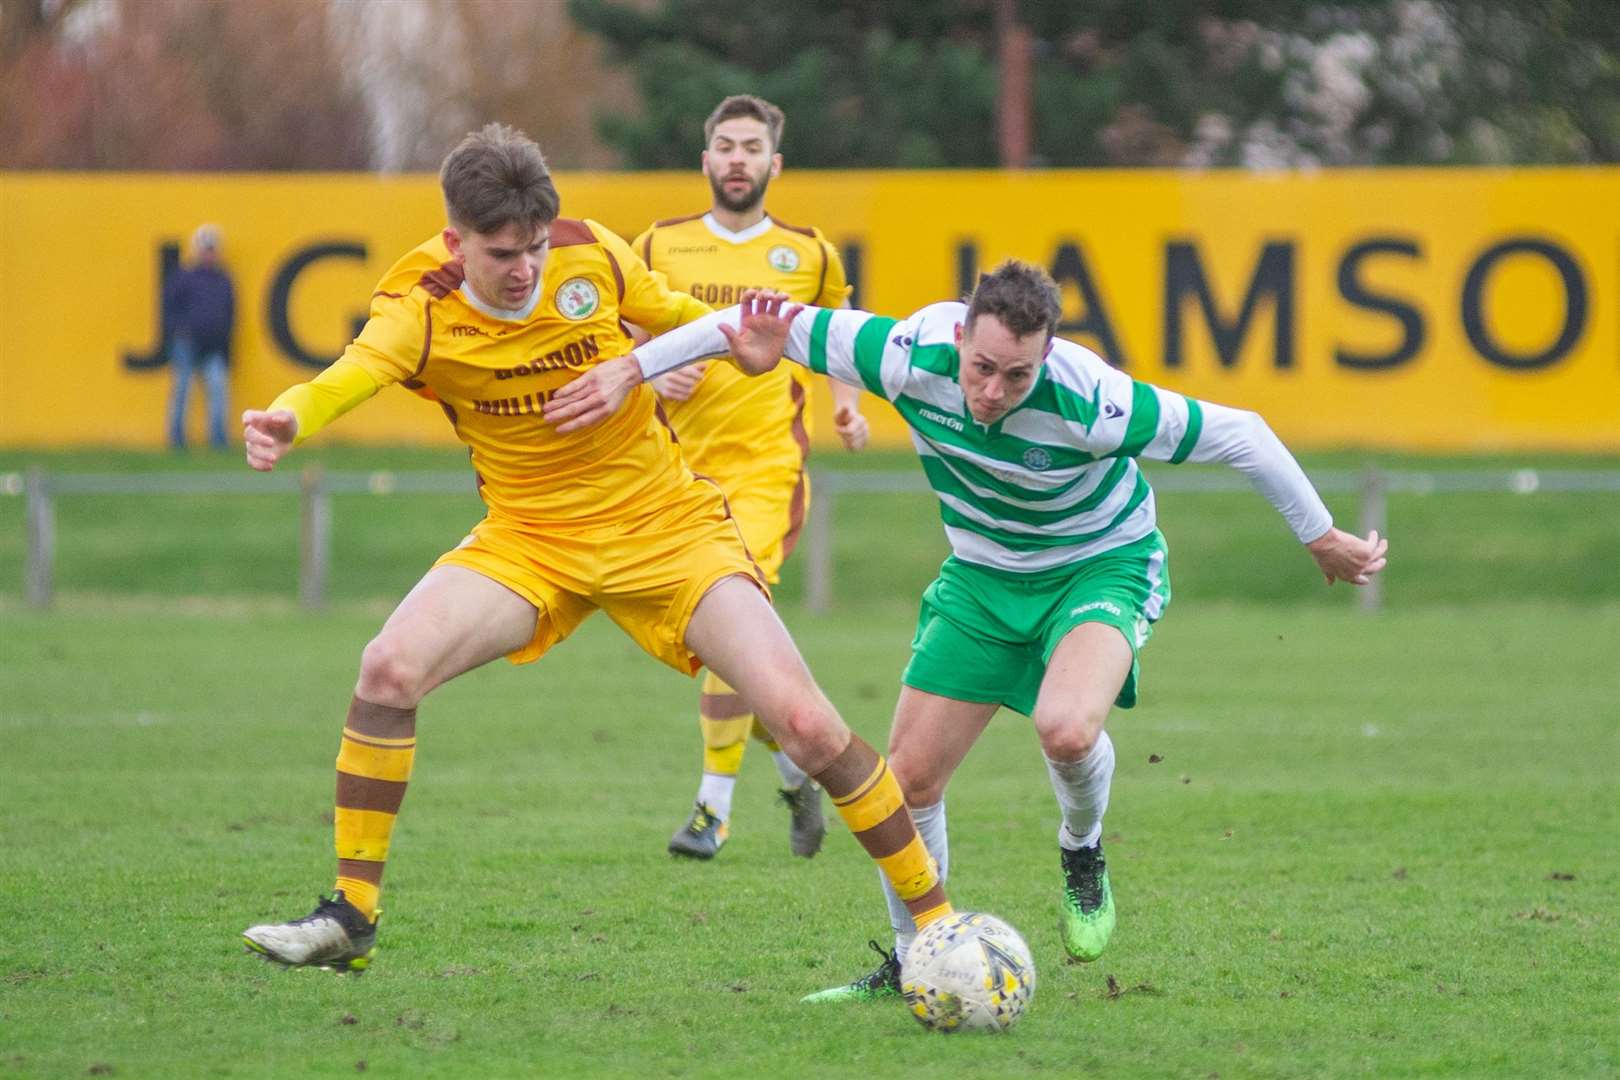 Forres Mechanics' Declan Hughes and Buckie Thistle's Kevin Fraser tussle for the ball. ..Forres Mechanics FC (2) vs Buckie Thistle FC (2) - Highland Football League - Mosset Park, Forres 08/02/2020...Picture: Daniel Forsyth..